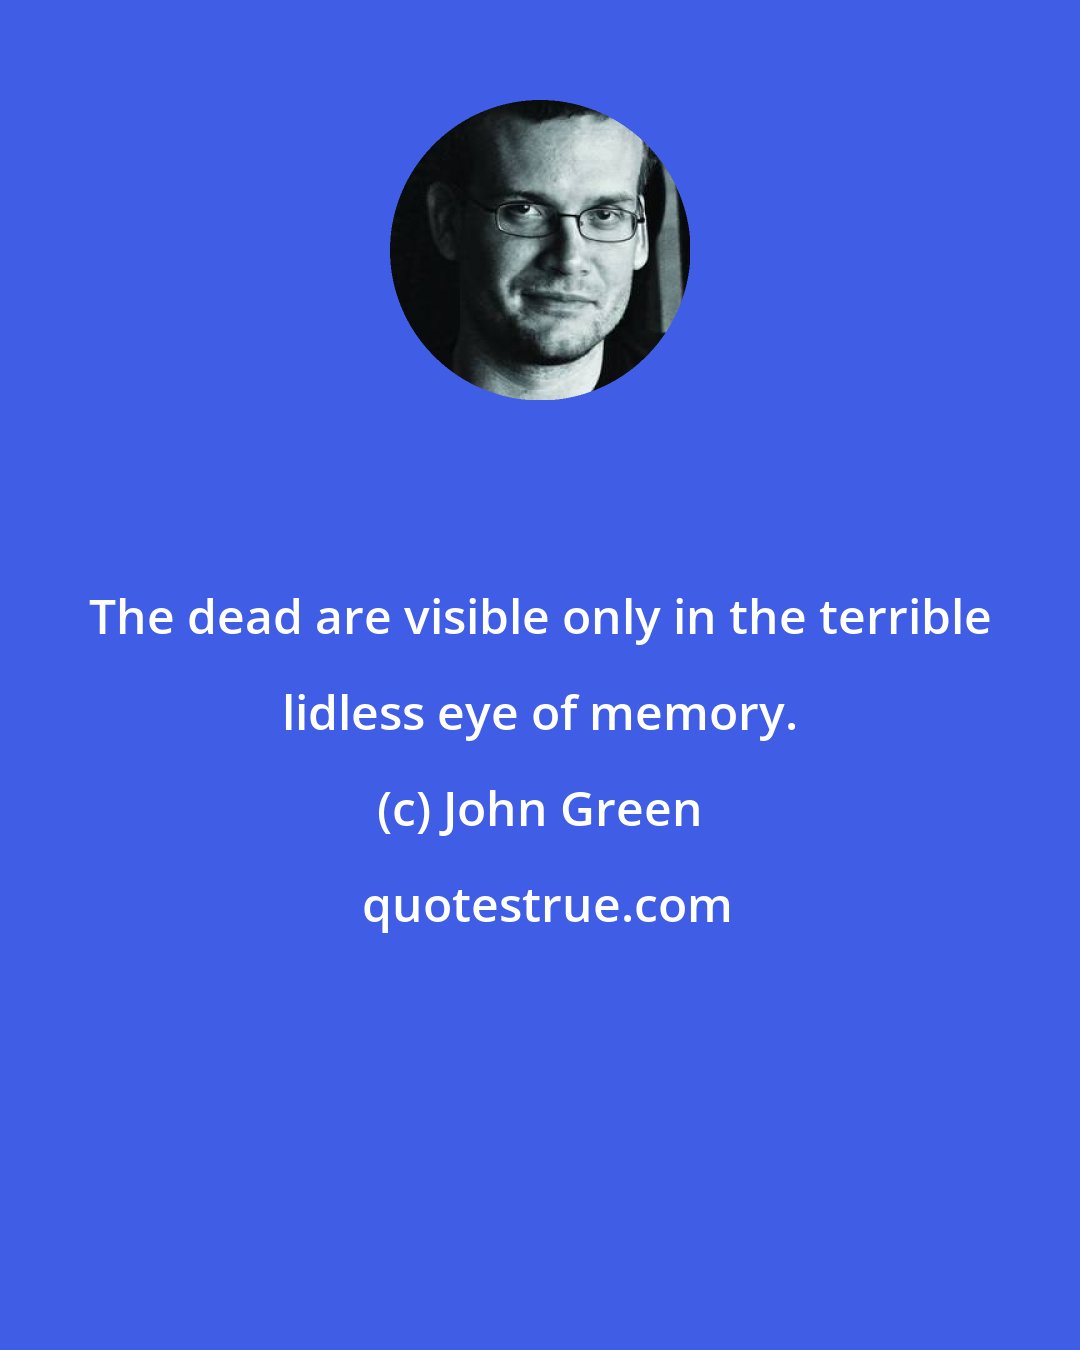 John Green: The dead are visible only in the terrible lidless eye of memory.